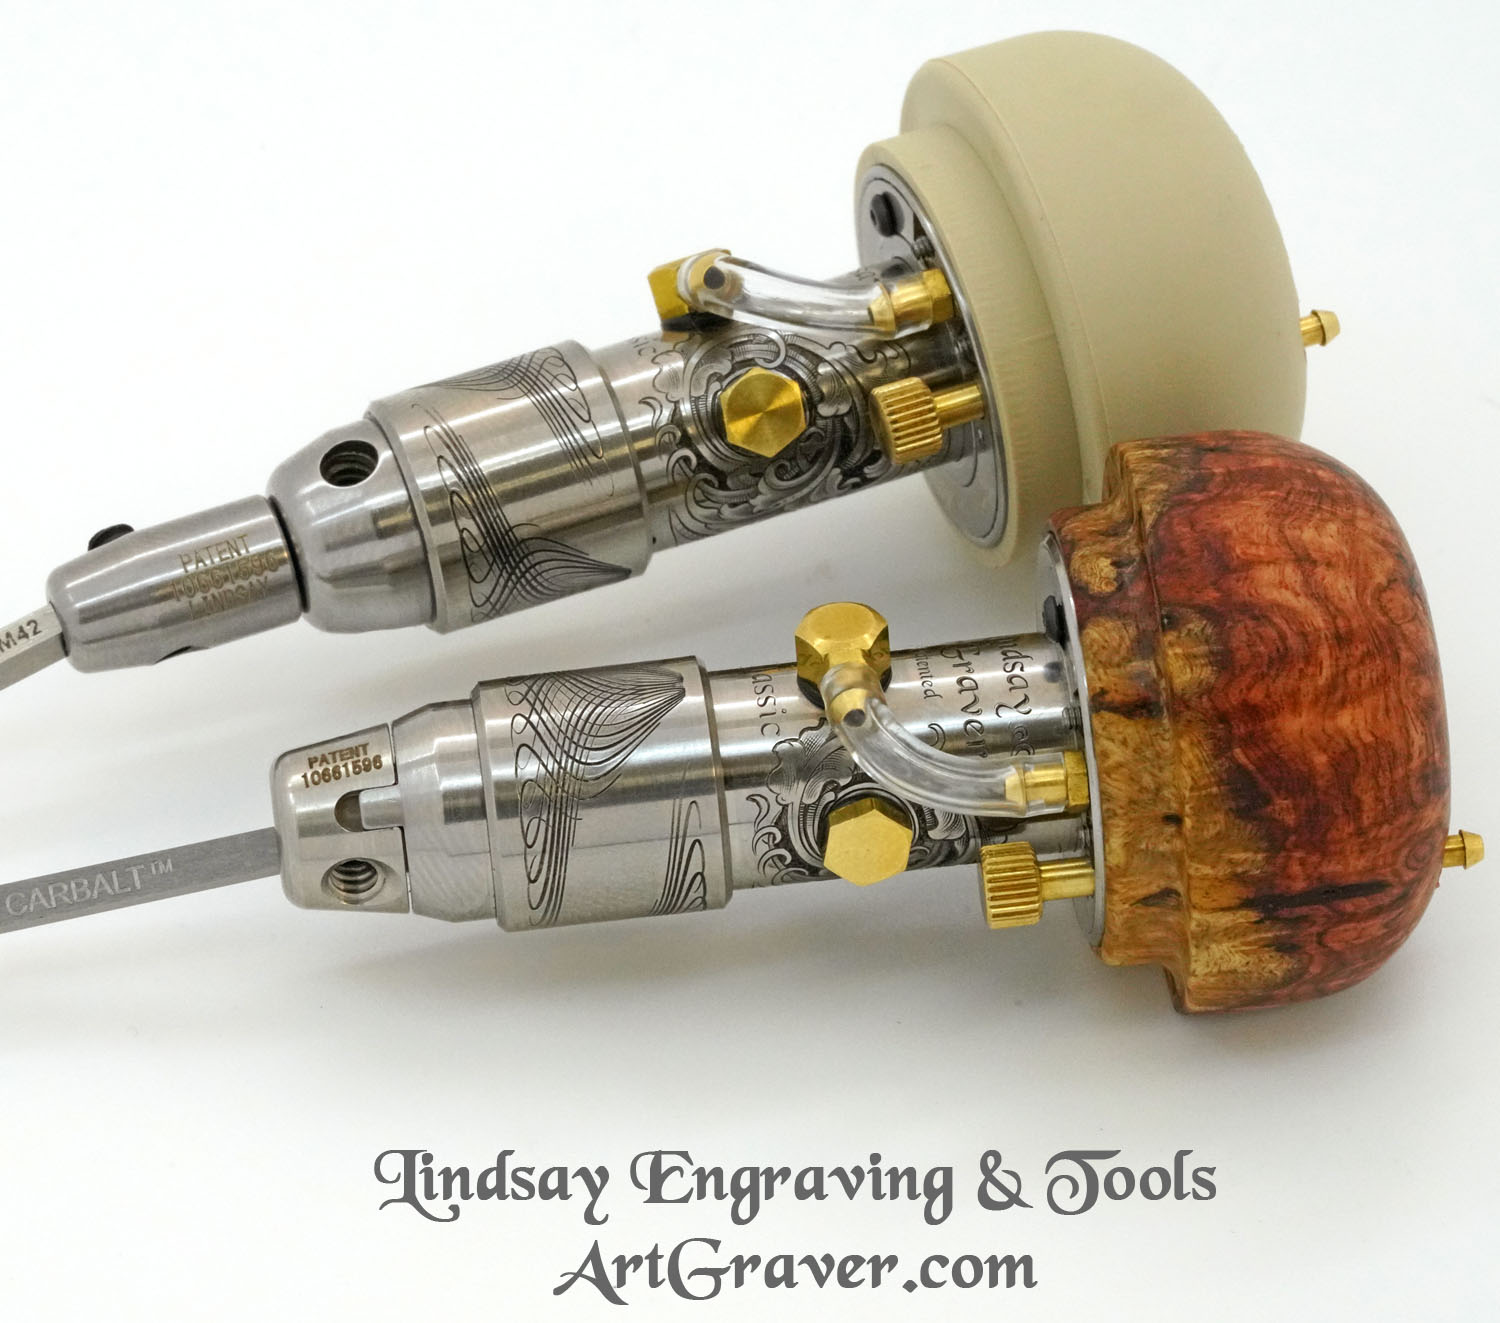 Palm controlled pneumatic hand engraving machine made by Steve Lindsay  Tools : r/specializedtools